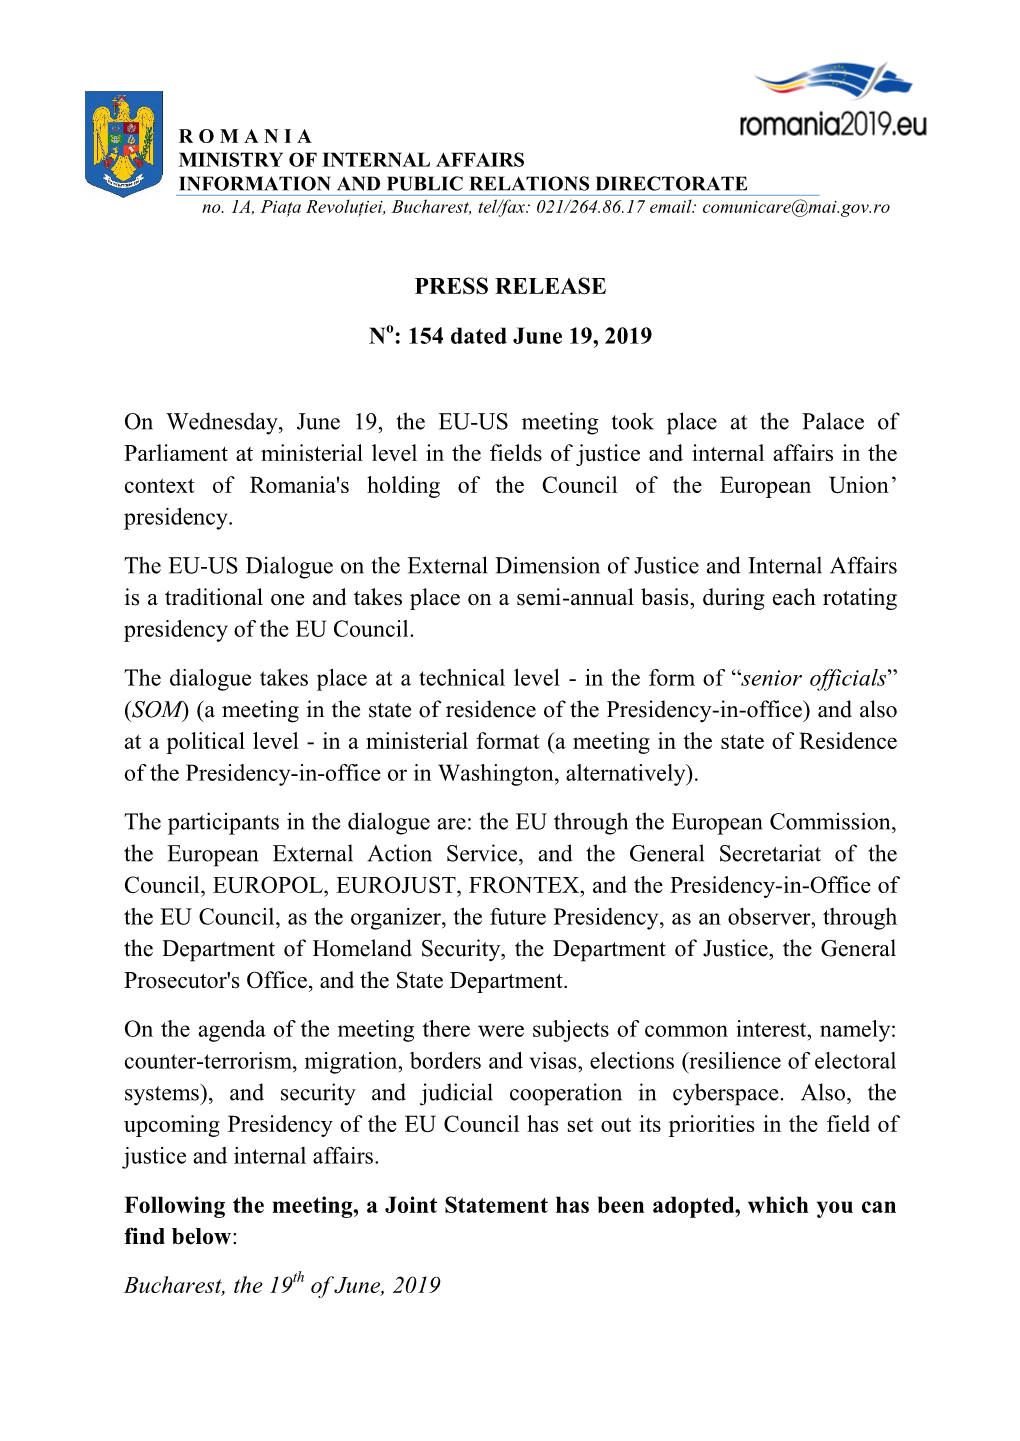 19 06 2019 EU-US Meeting on Justice and Internal Affairs